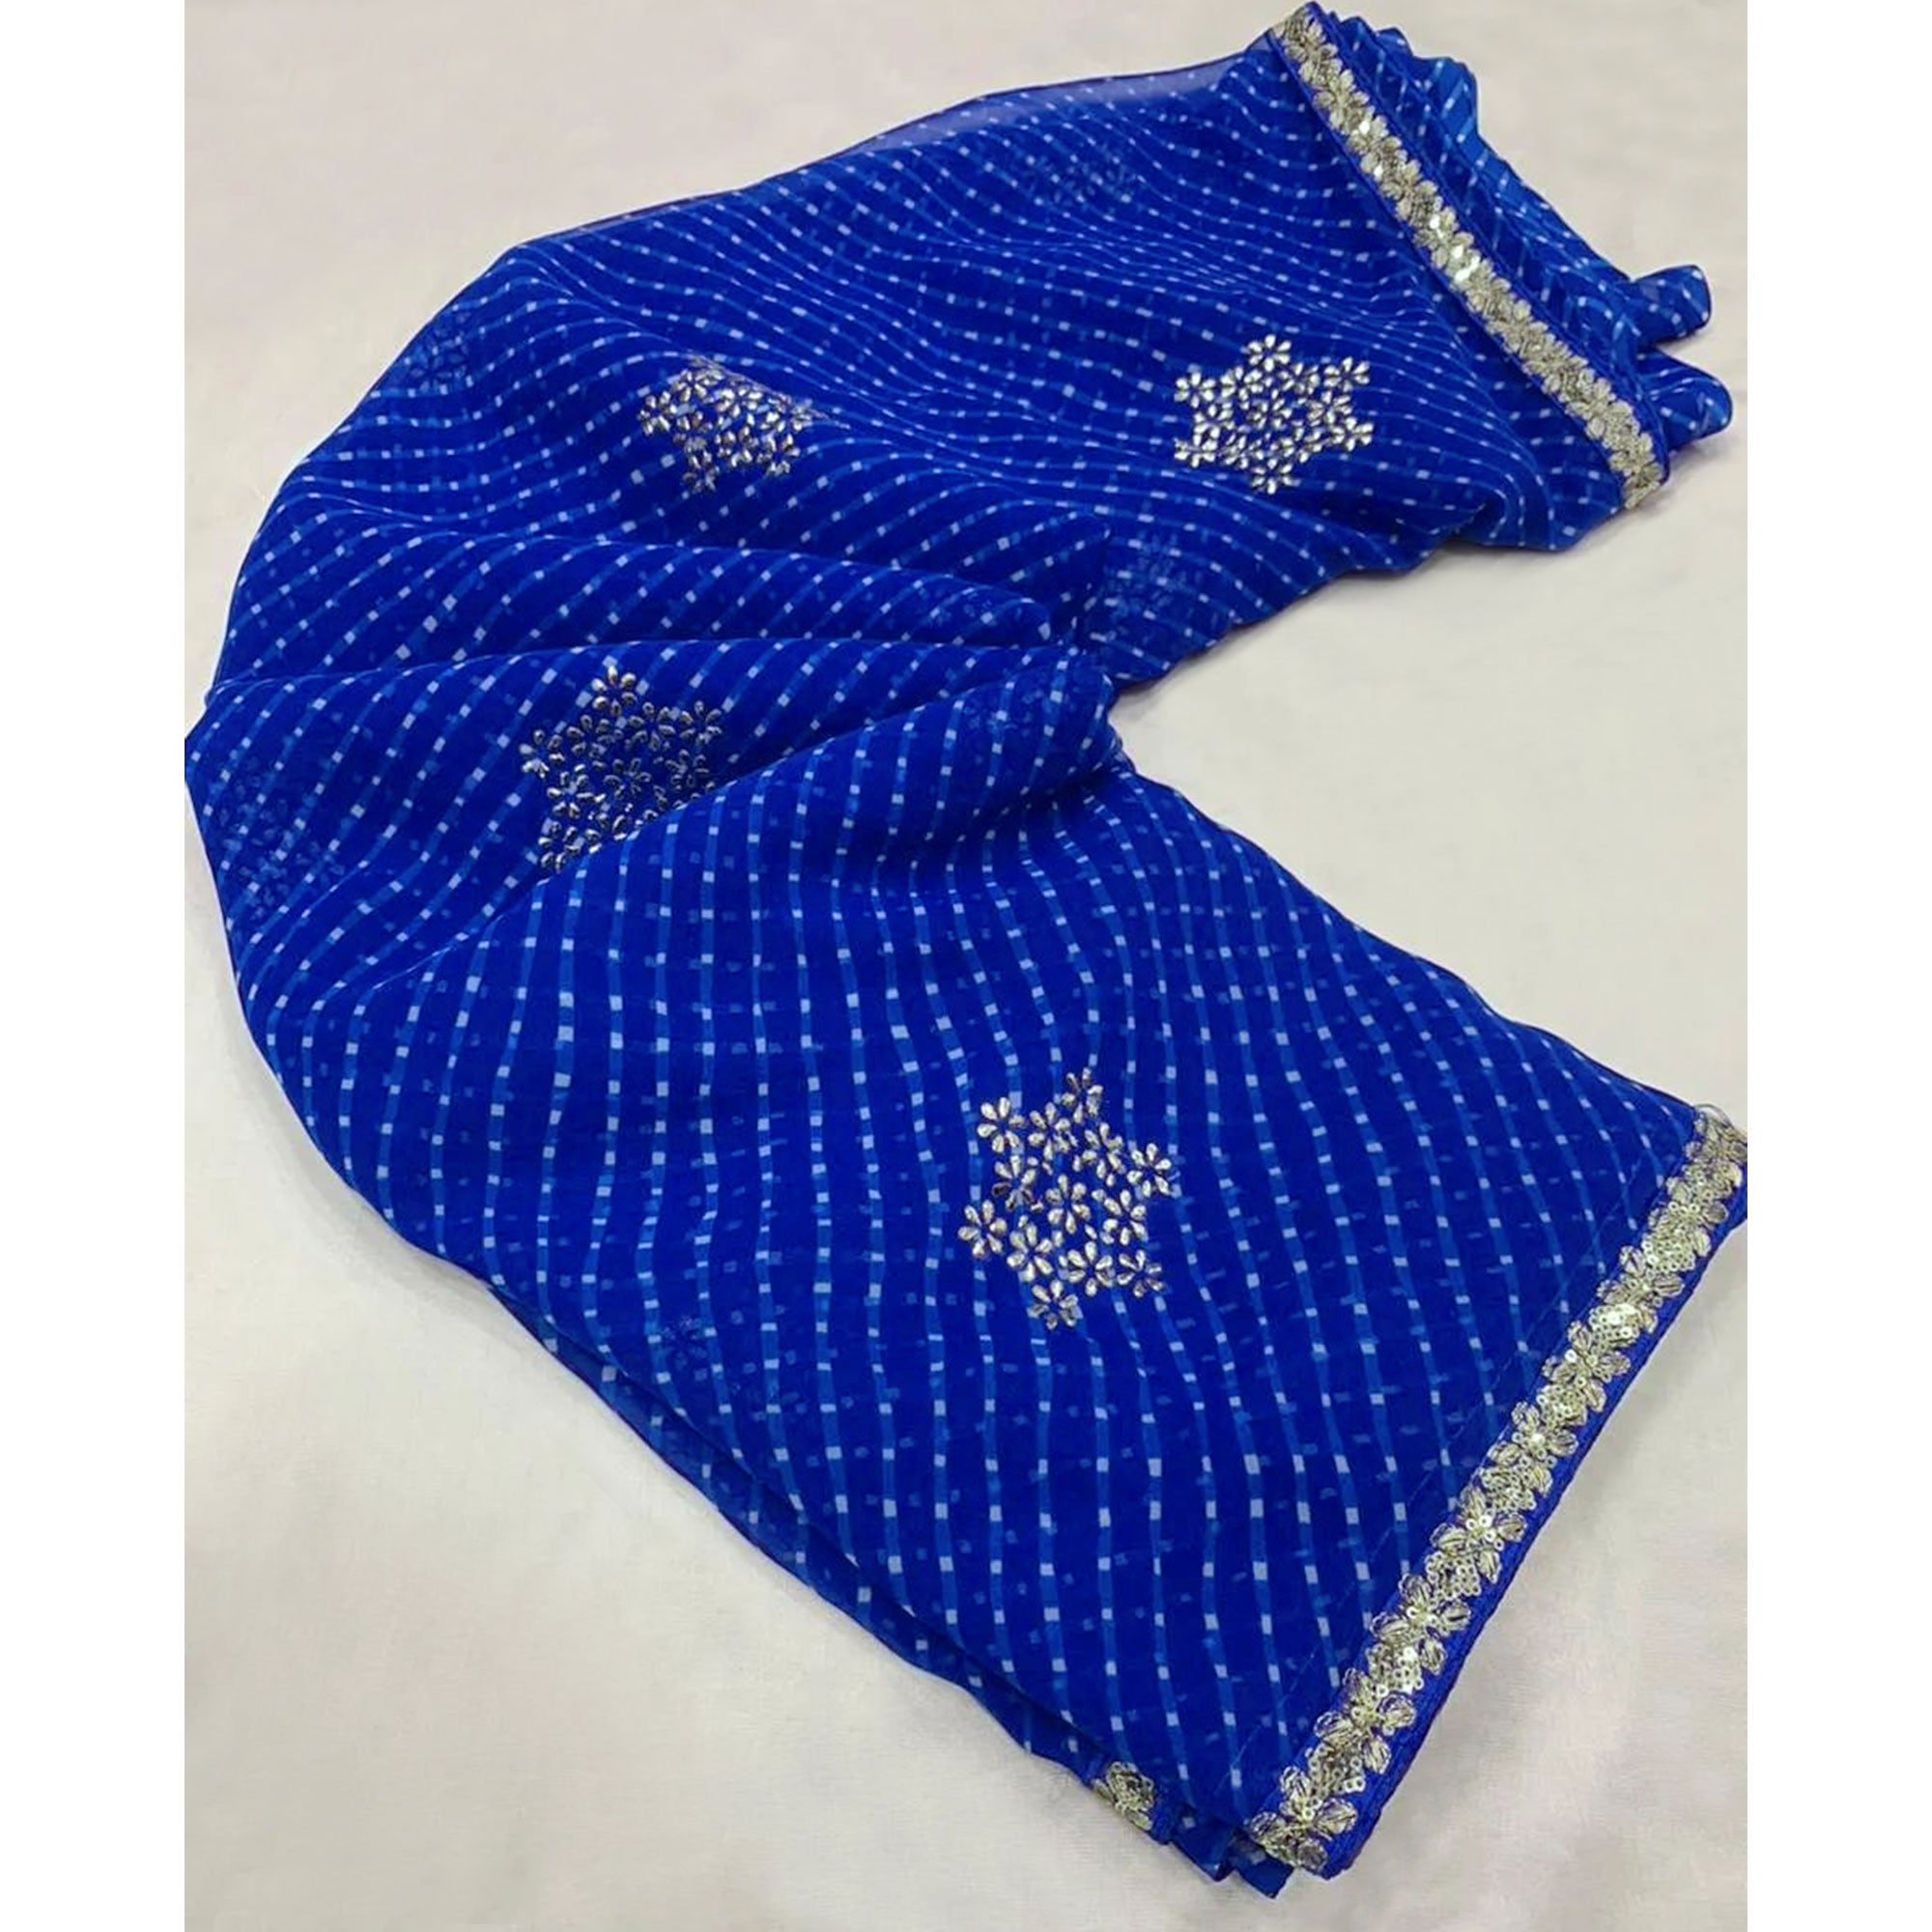 Blue Printed Georgette Saree With lace Border